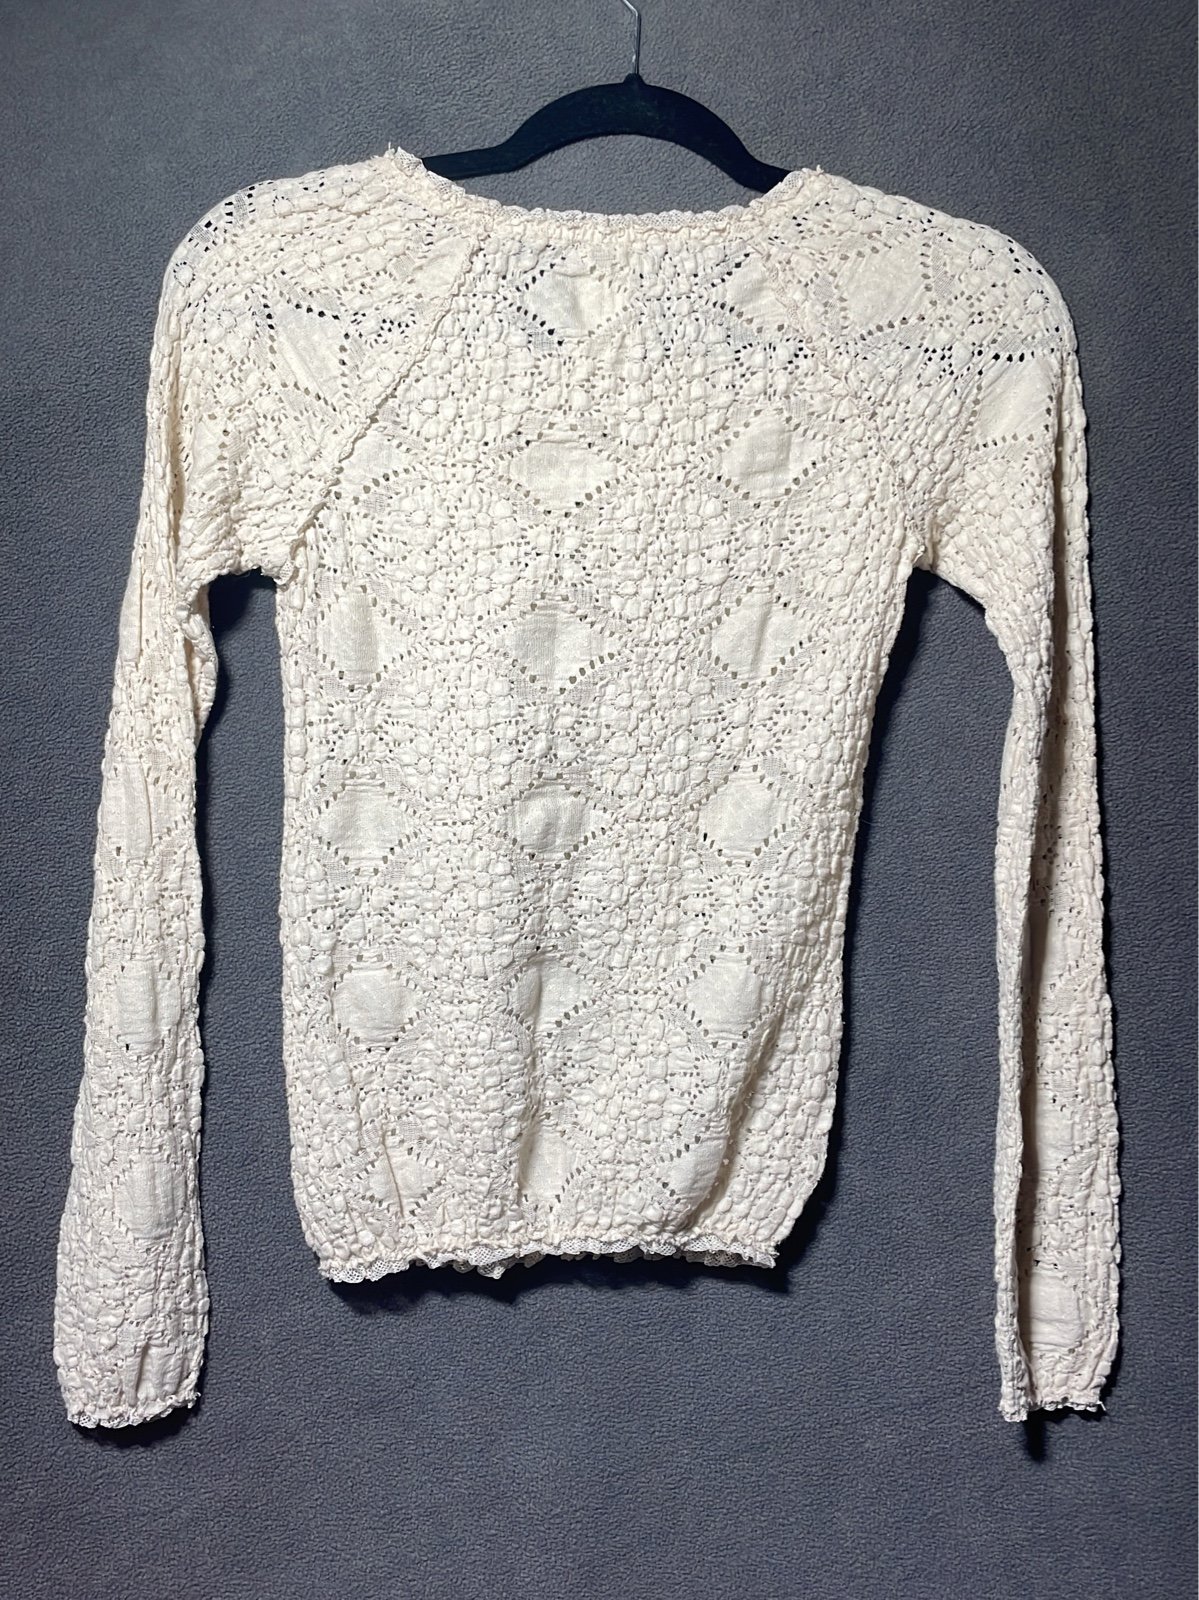 large selection Brand new Free People LS lace top oJeNc6Hj9 Online Shop